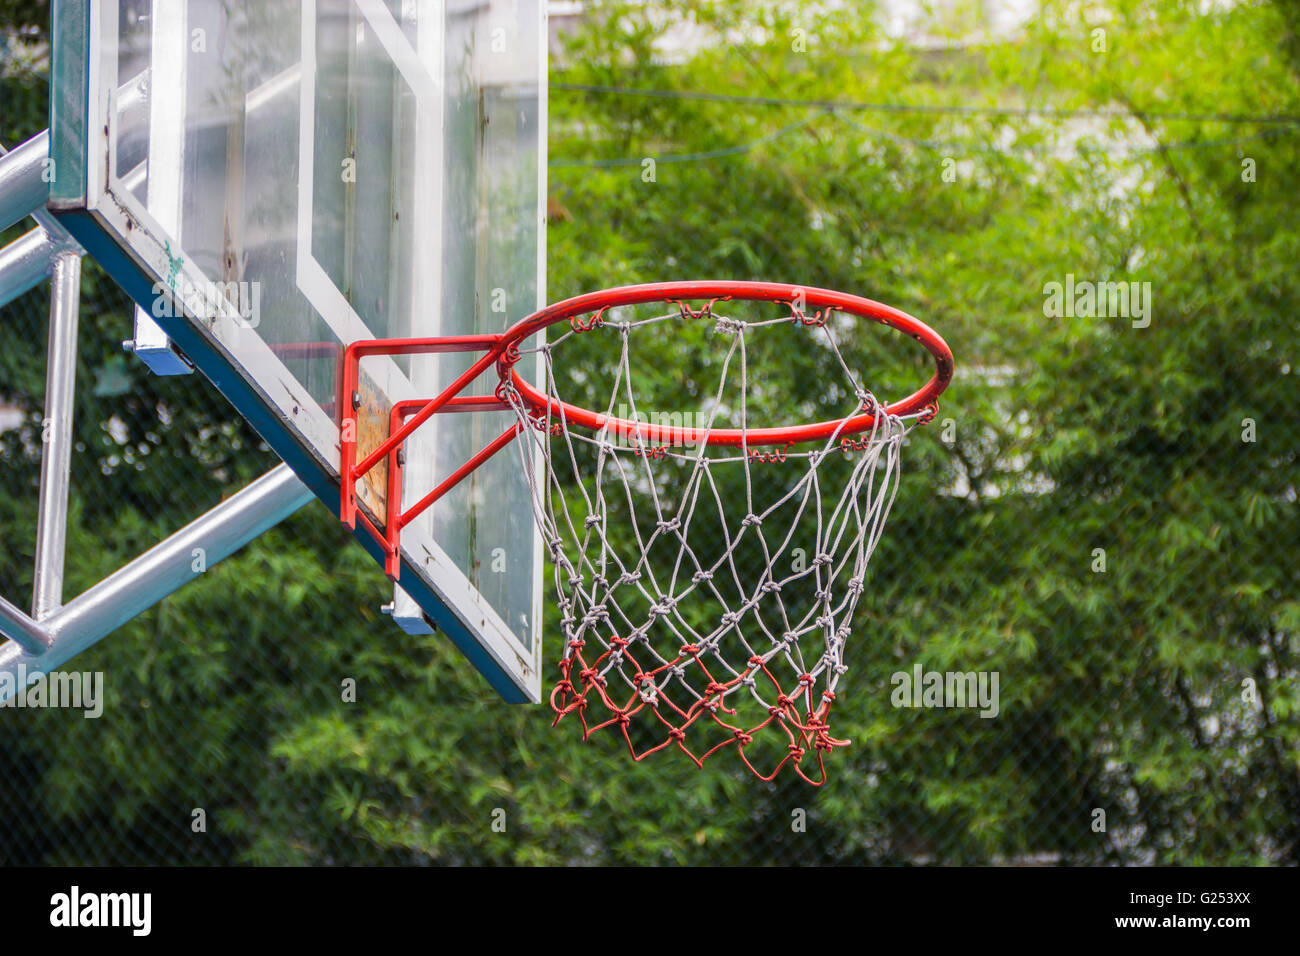 Basketball hoop in the park with green trees as background. Stock Photo